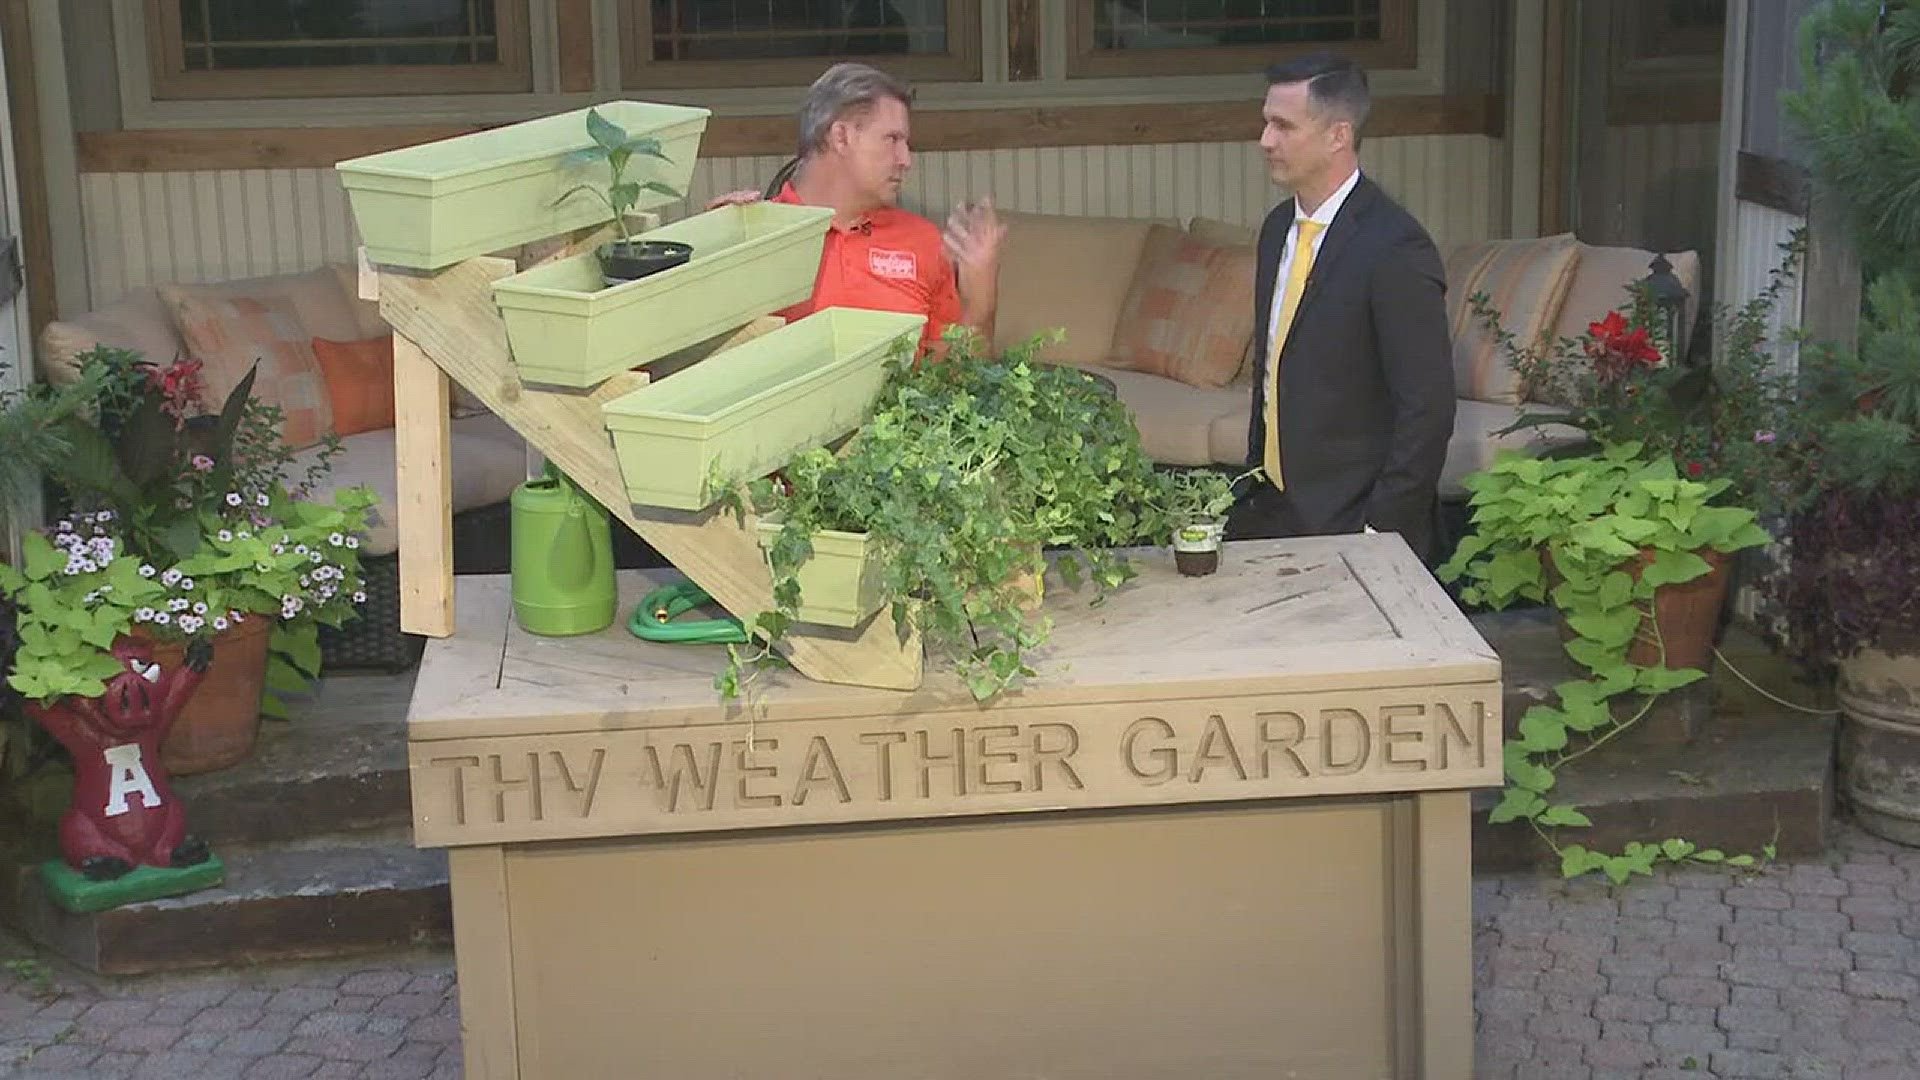 Lifestyle expert Chris H. Olsen joined THV11 This Morning to tell us about gardening made easy with a vertical planter